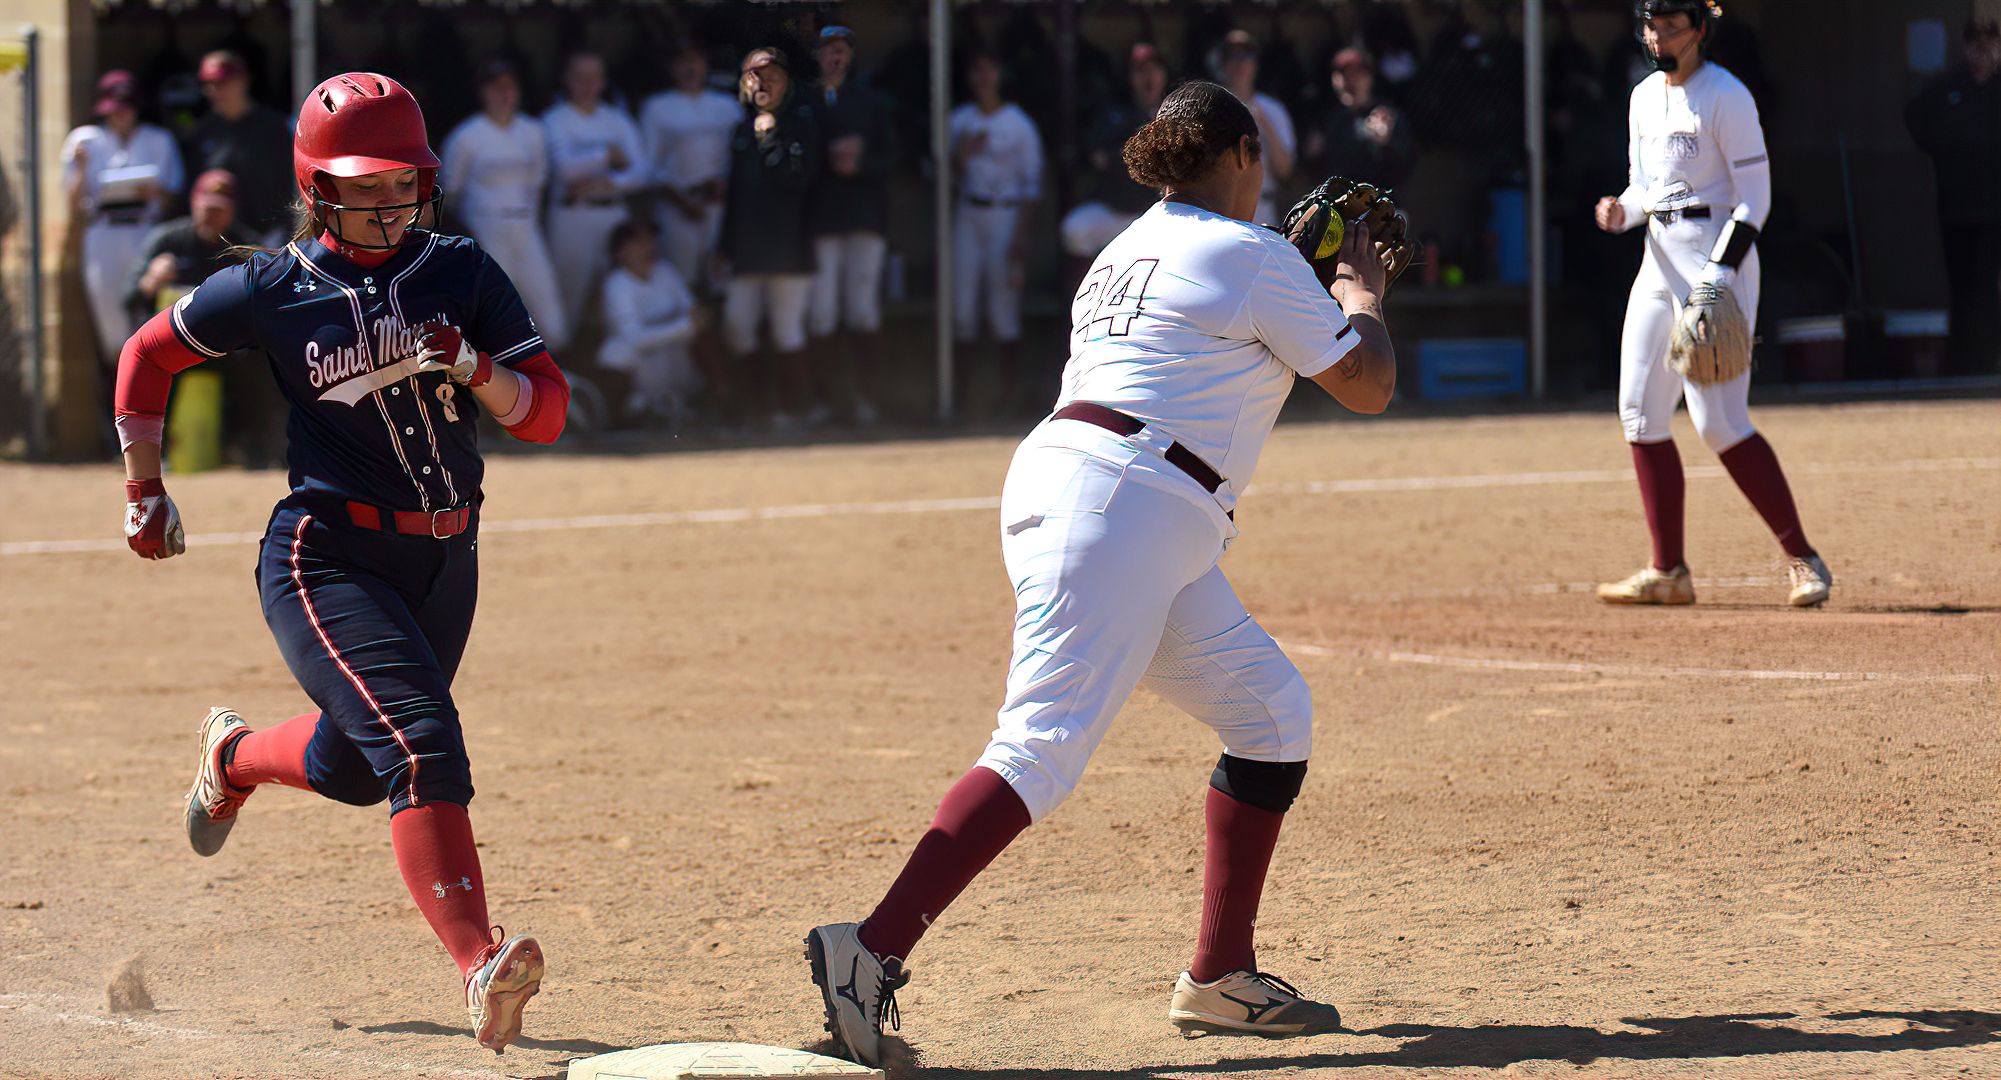 Cobber first baseman Gabby Brown hangs on to the ball to record the out during the second game of the Cobbers' DH against St. Mary's.